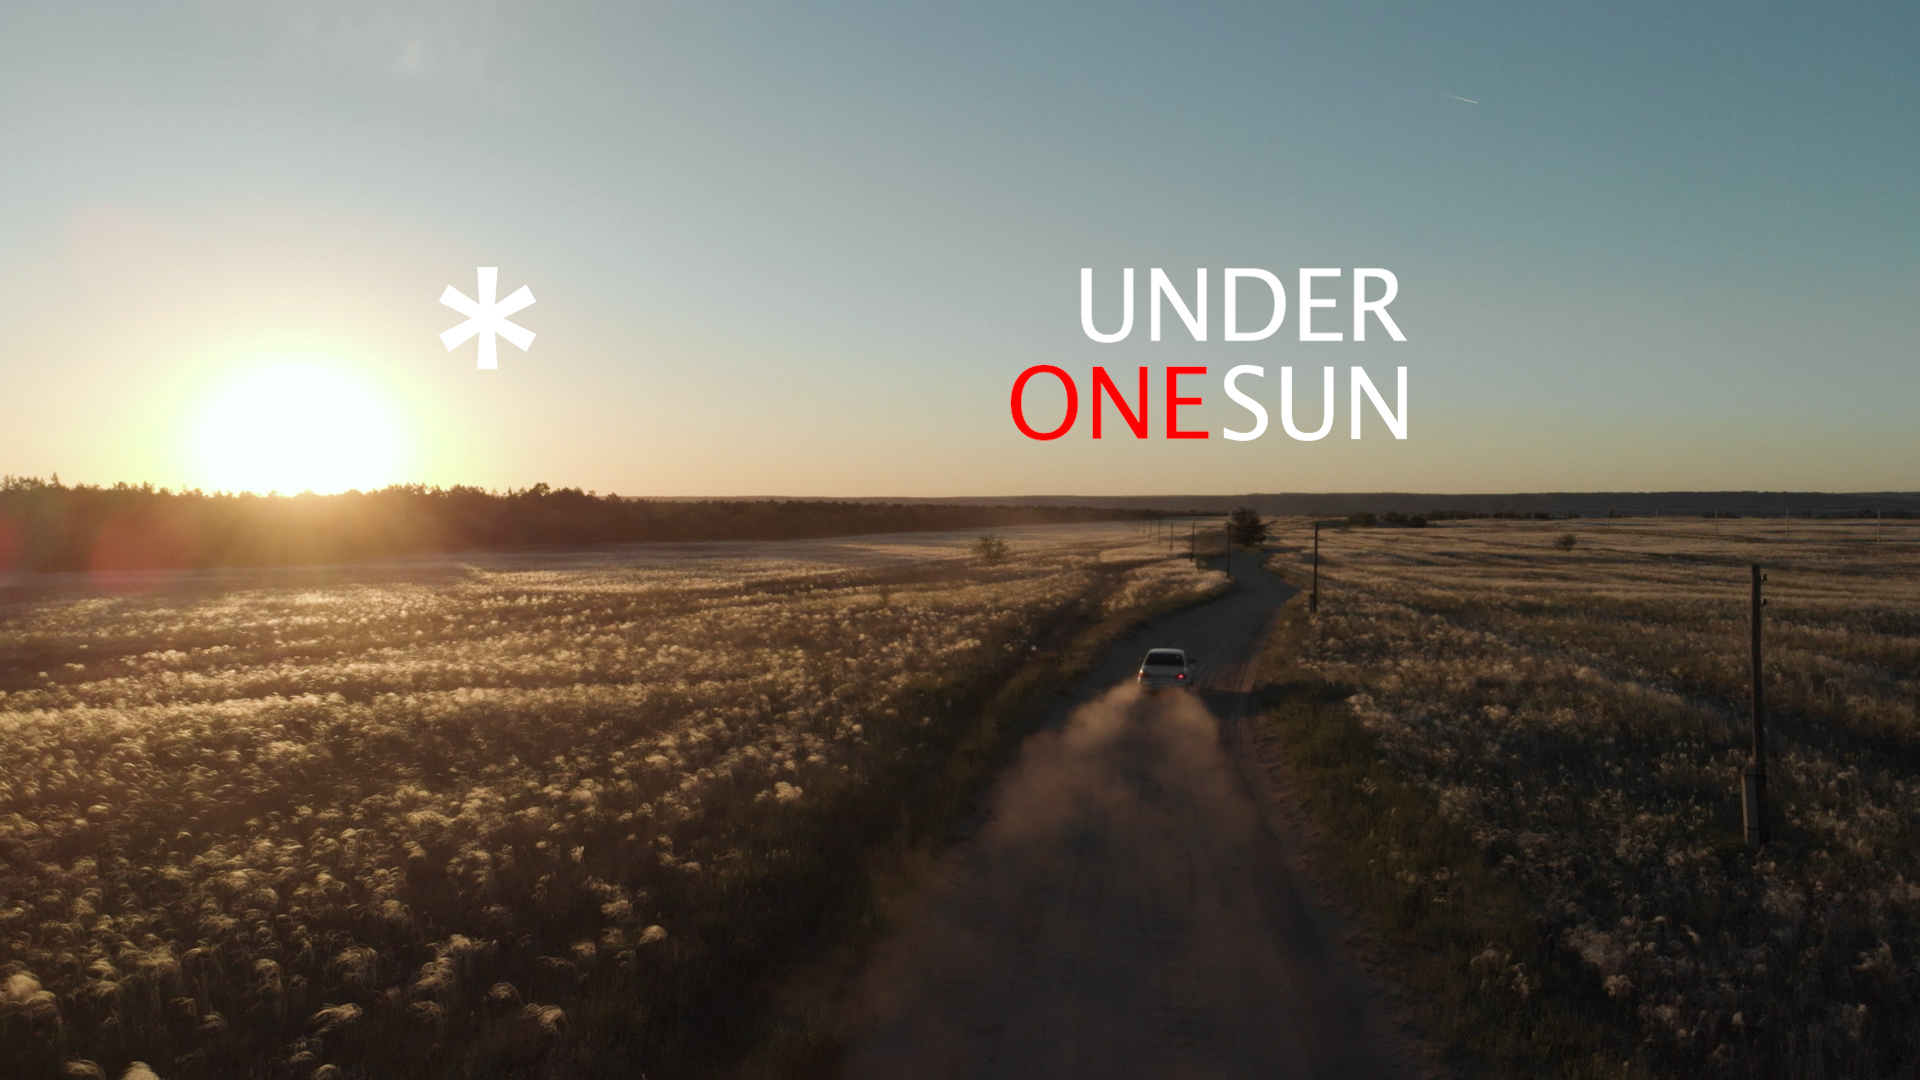 o* ... we are under ONE SUN